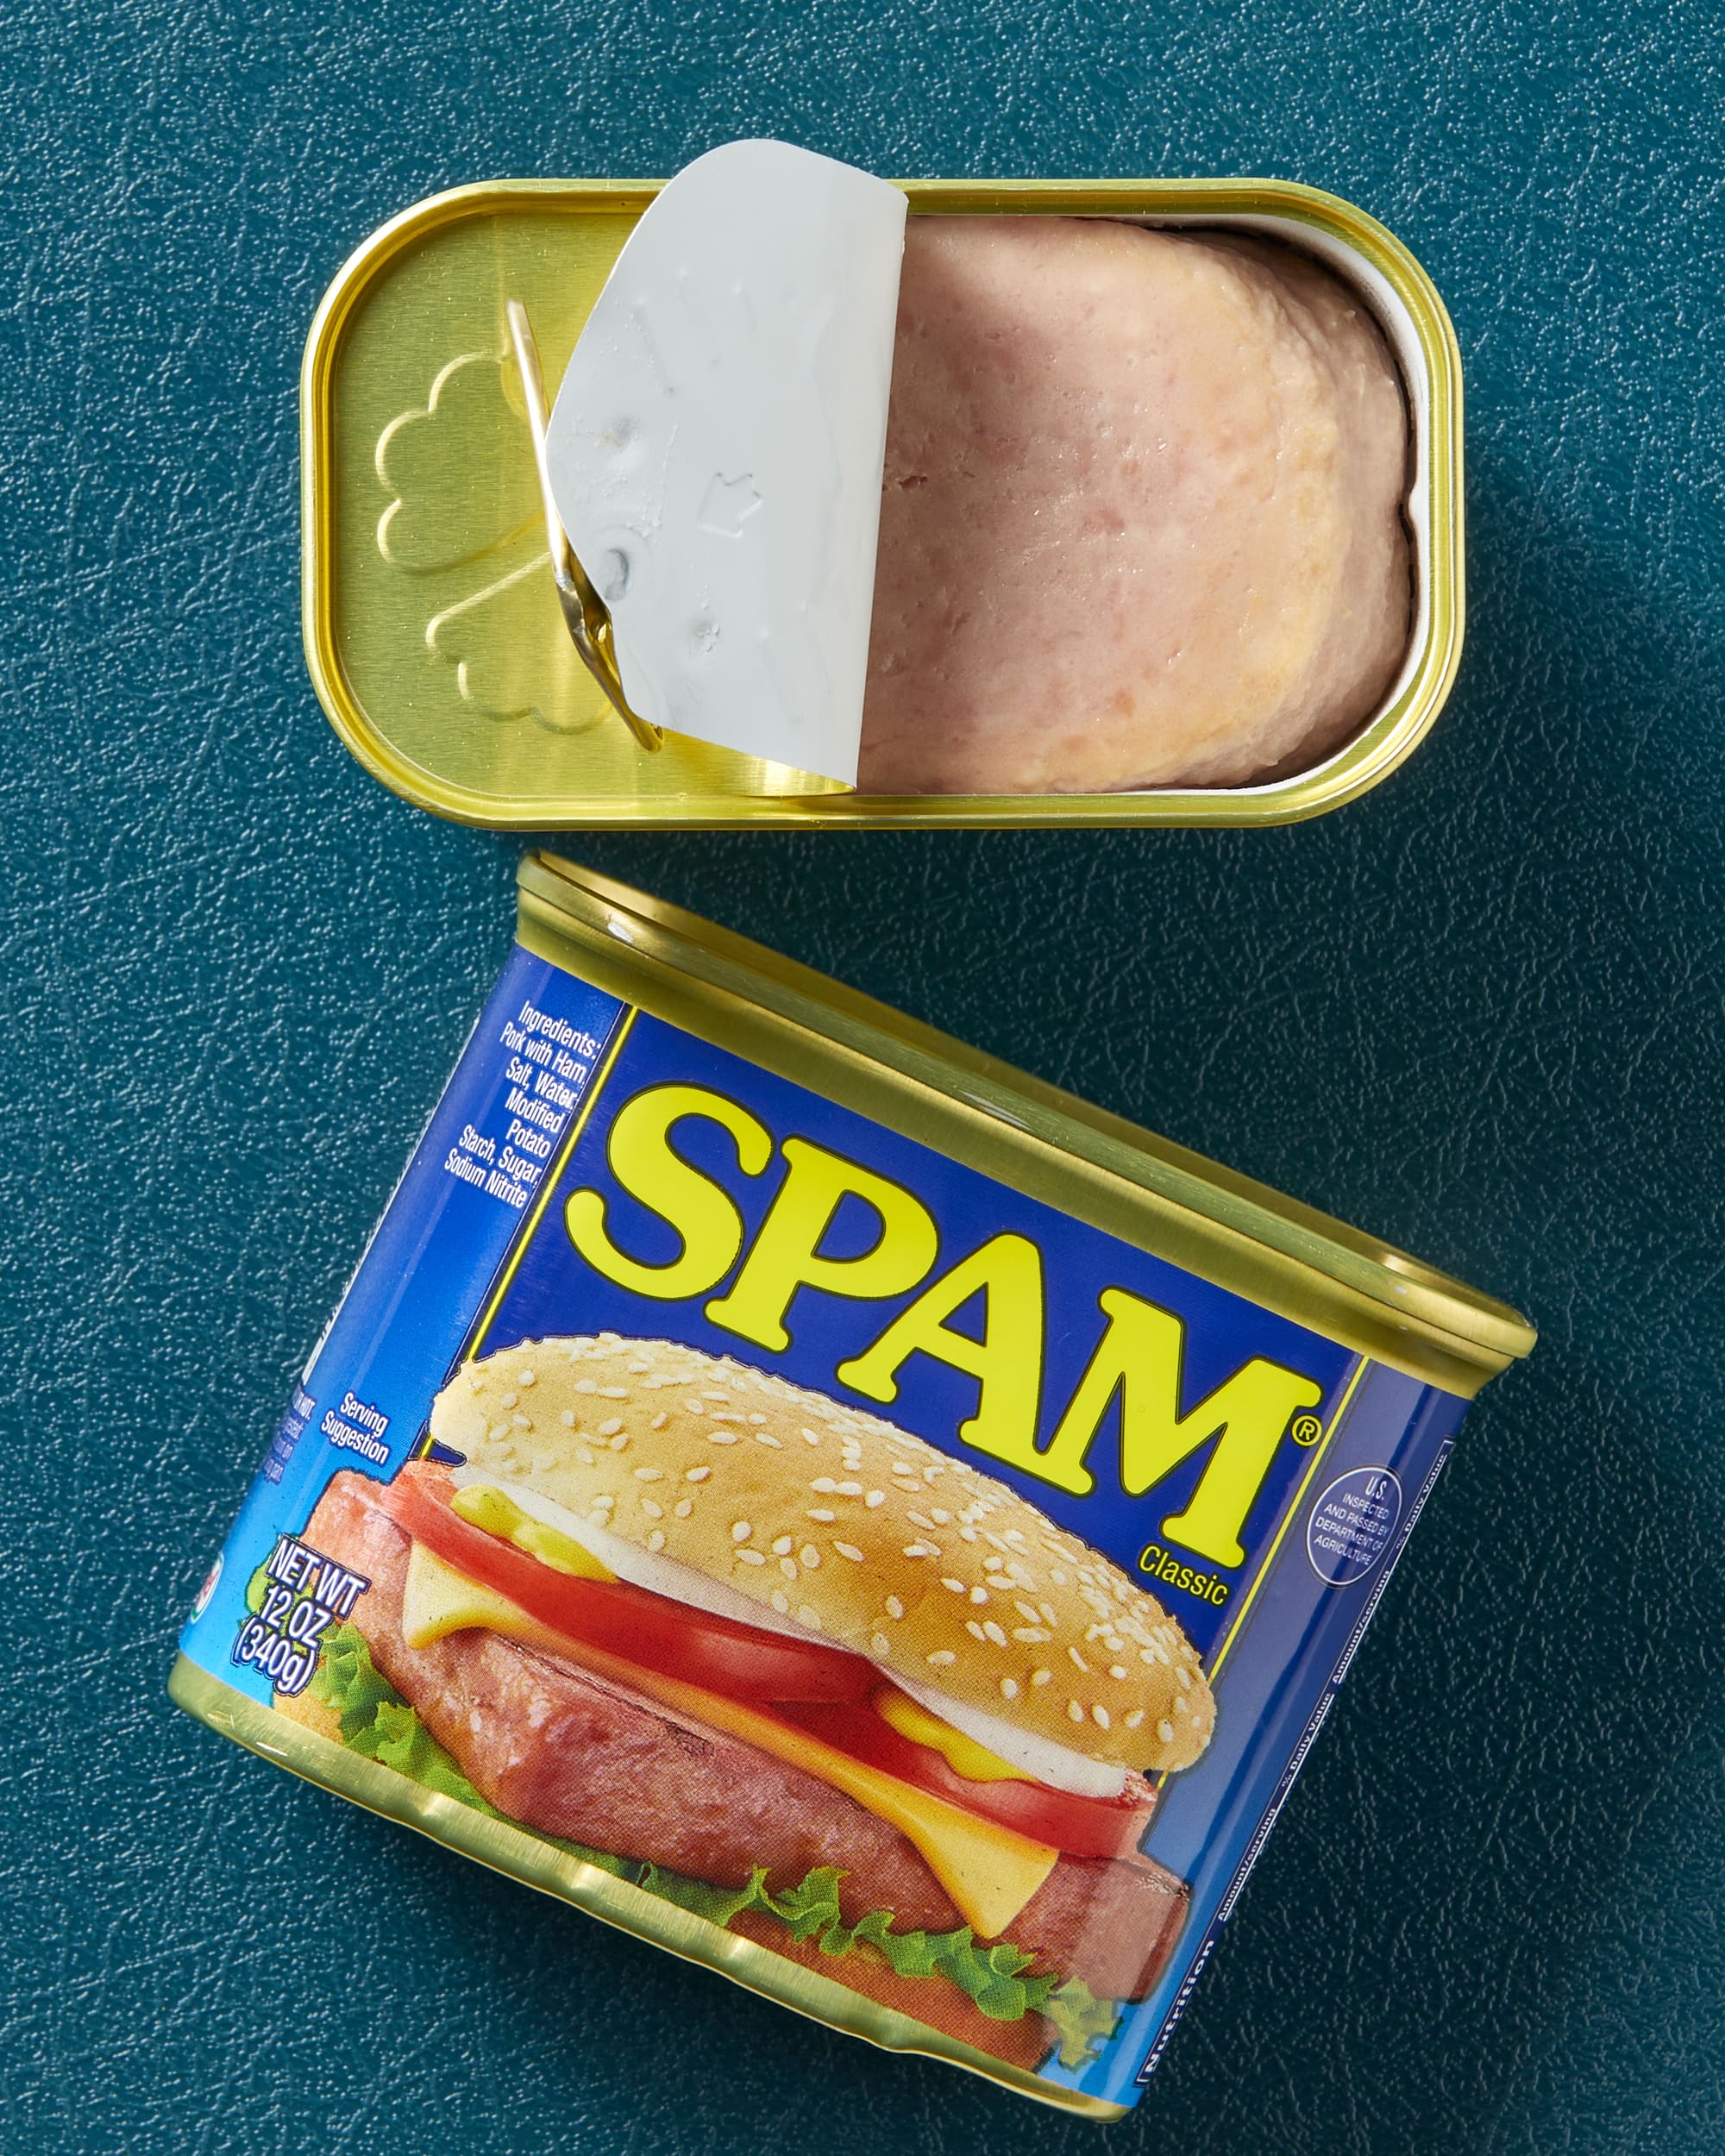 What Is Spam?